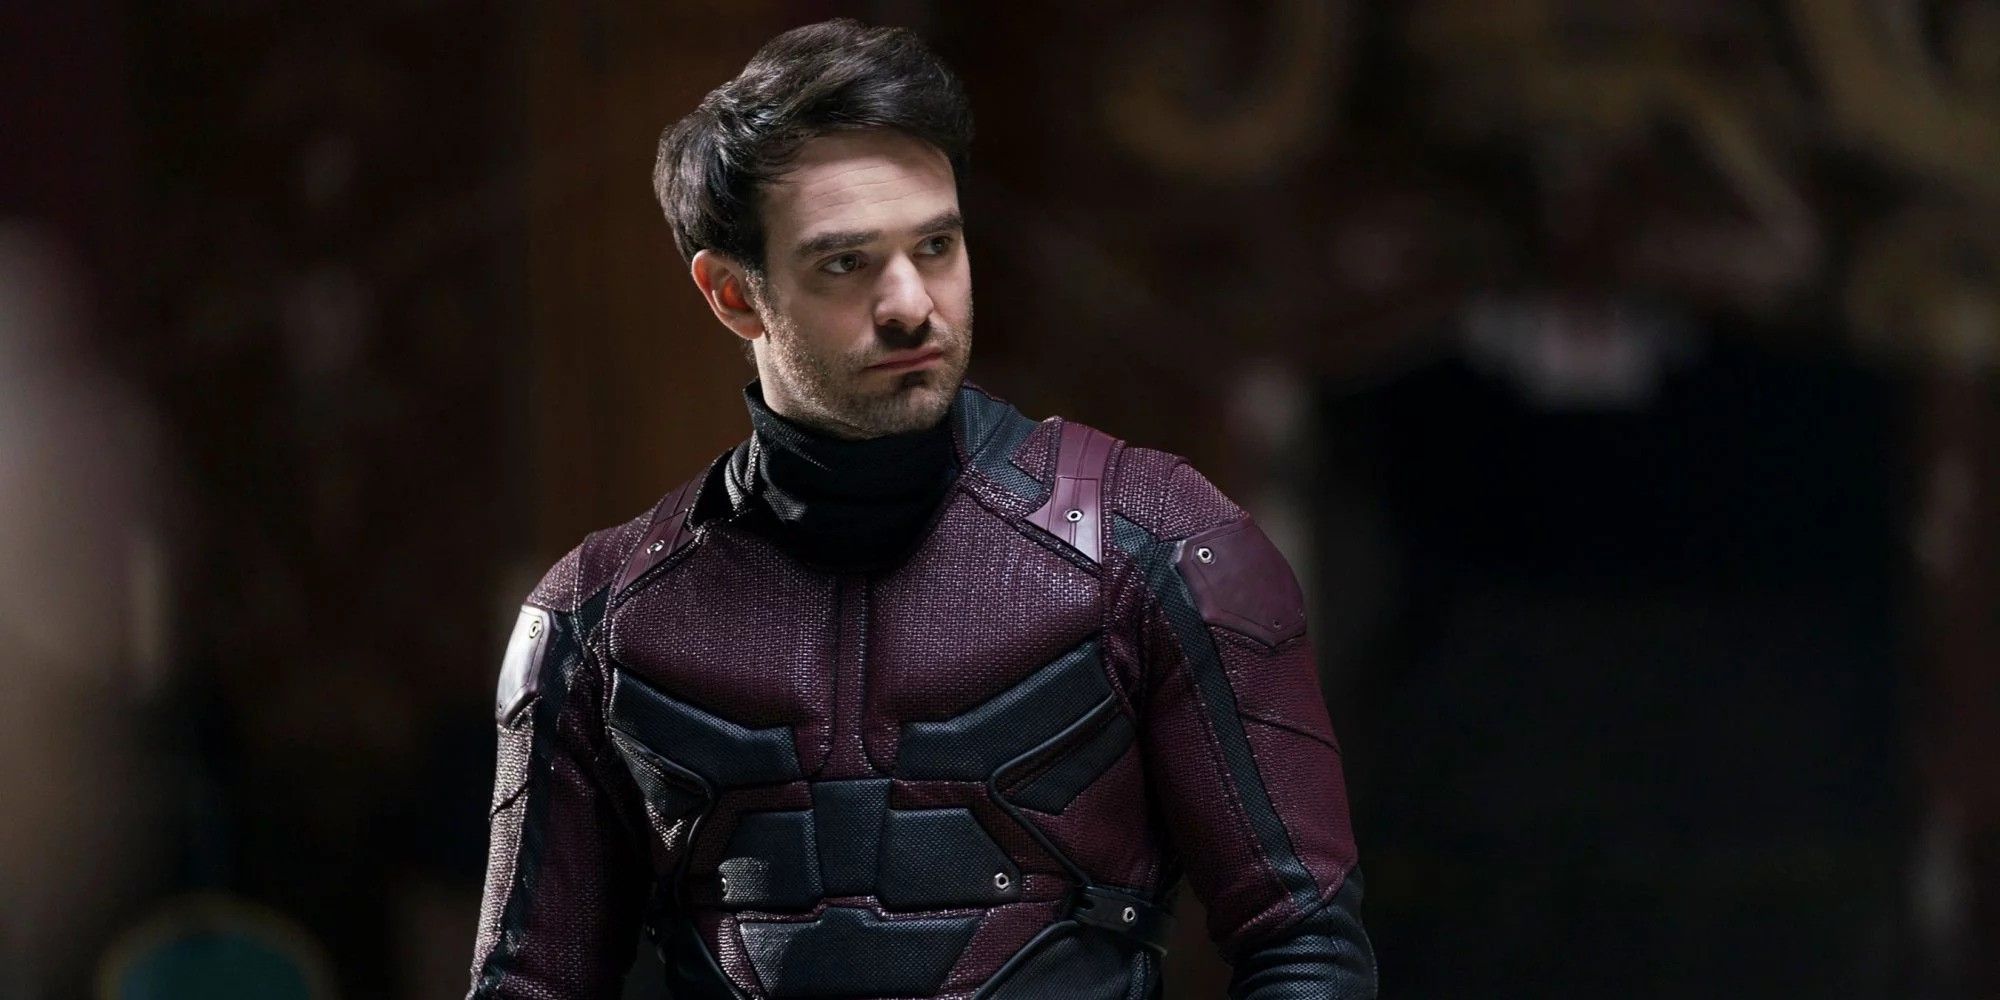 Daredevil without his mask in the Daredevil Netflix series.